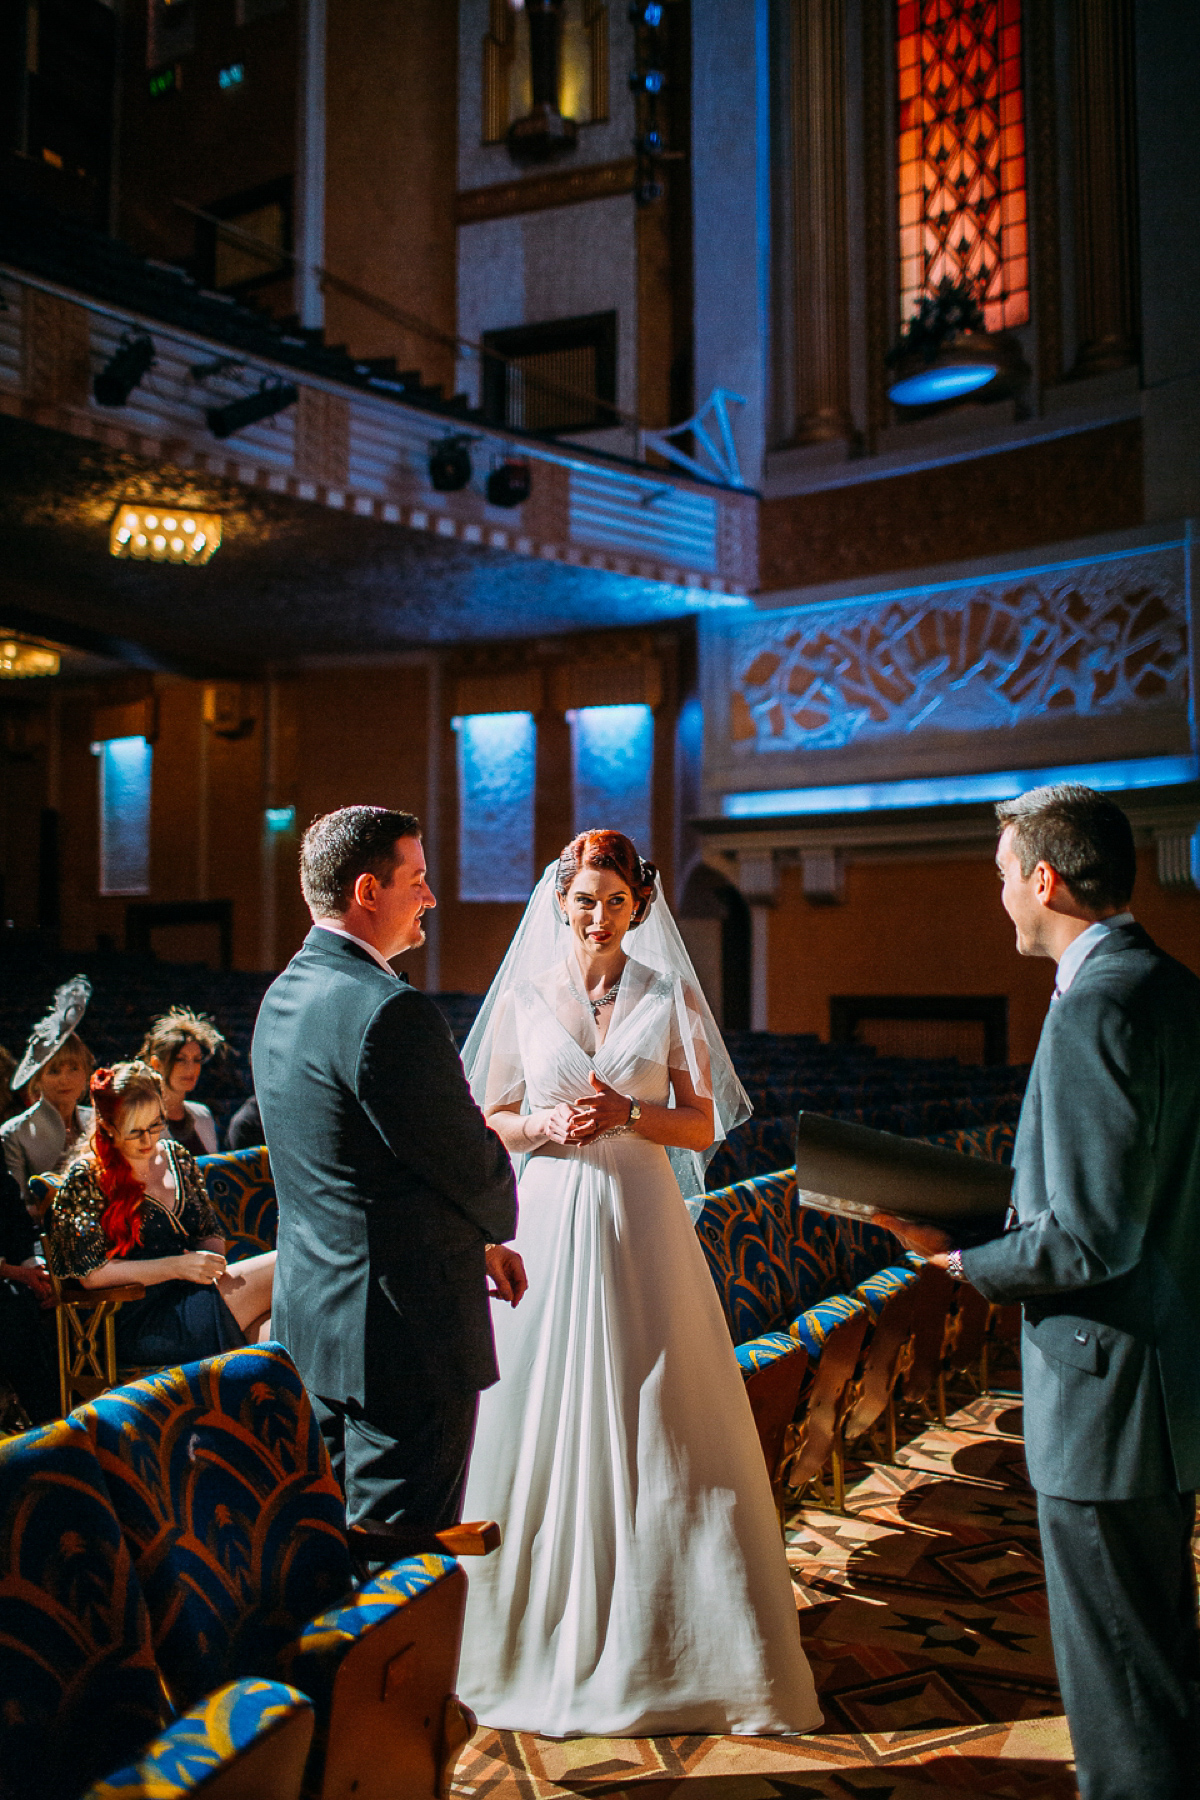 A Black tie cinema wedding. Photography by Emilie May.